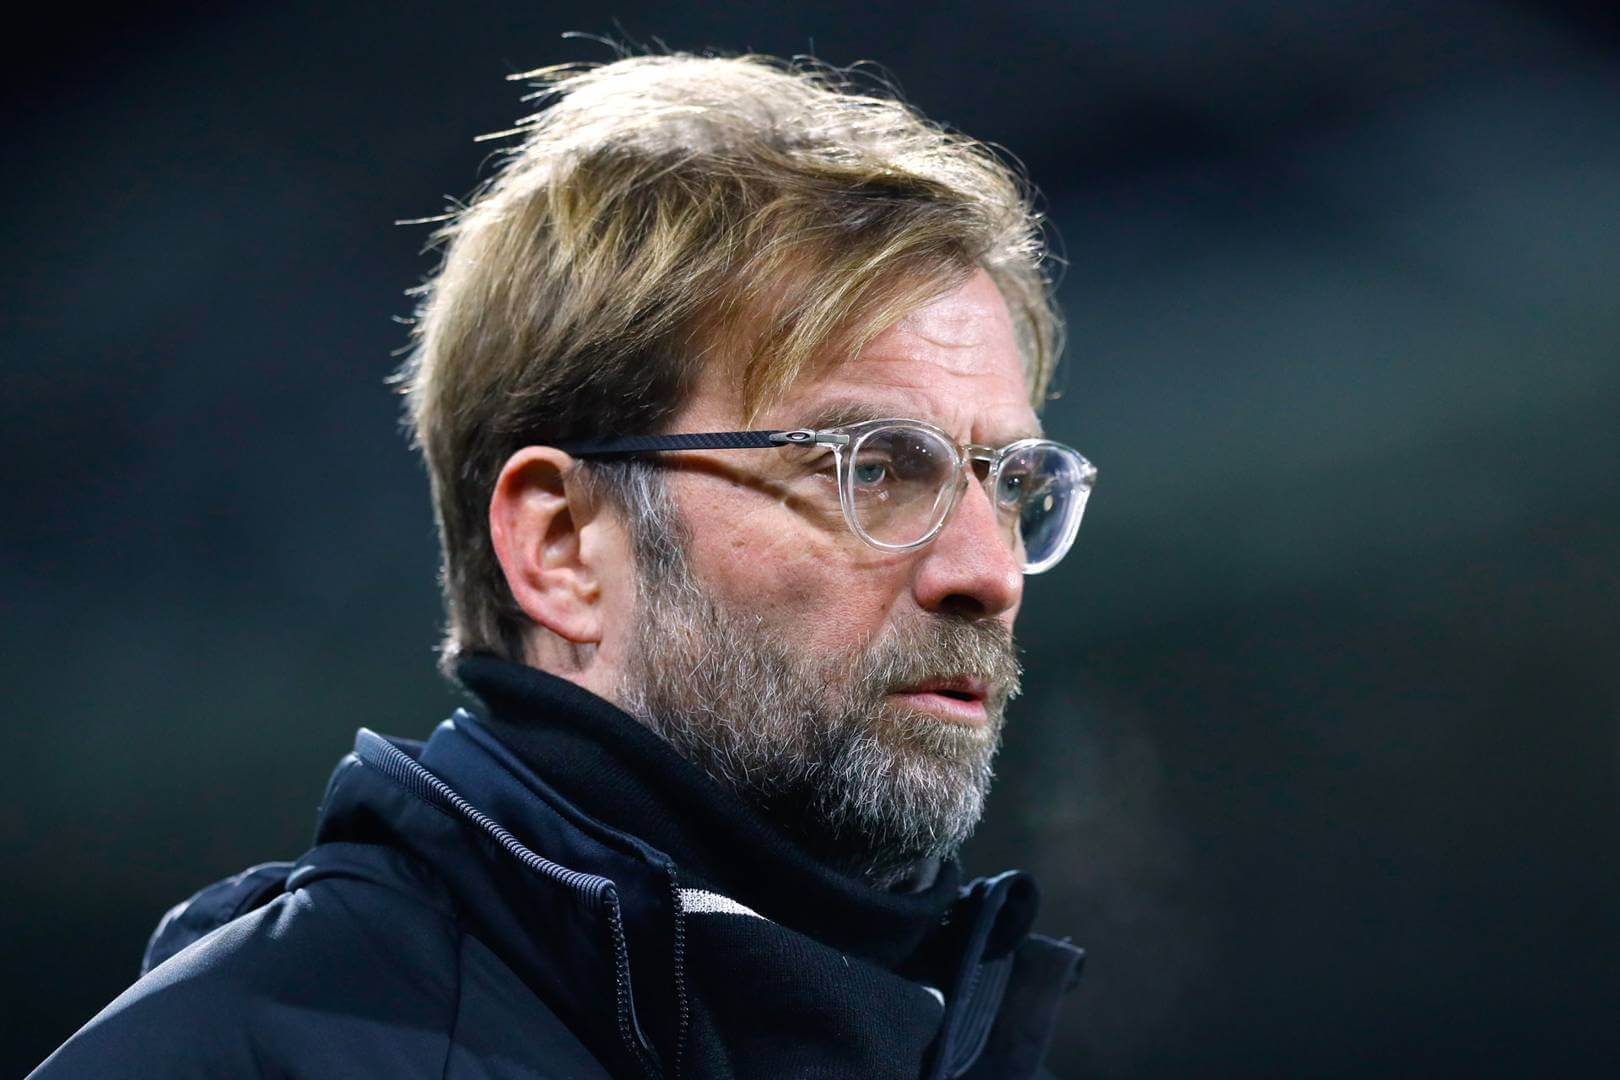 Bayern’s Clash With Liverpool Isn’t Personal For Klopp1620 x 1080